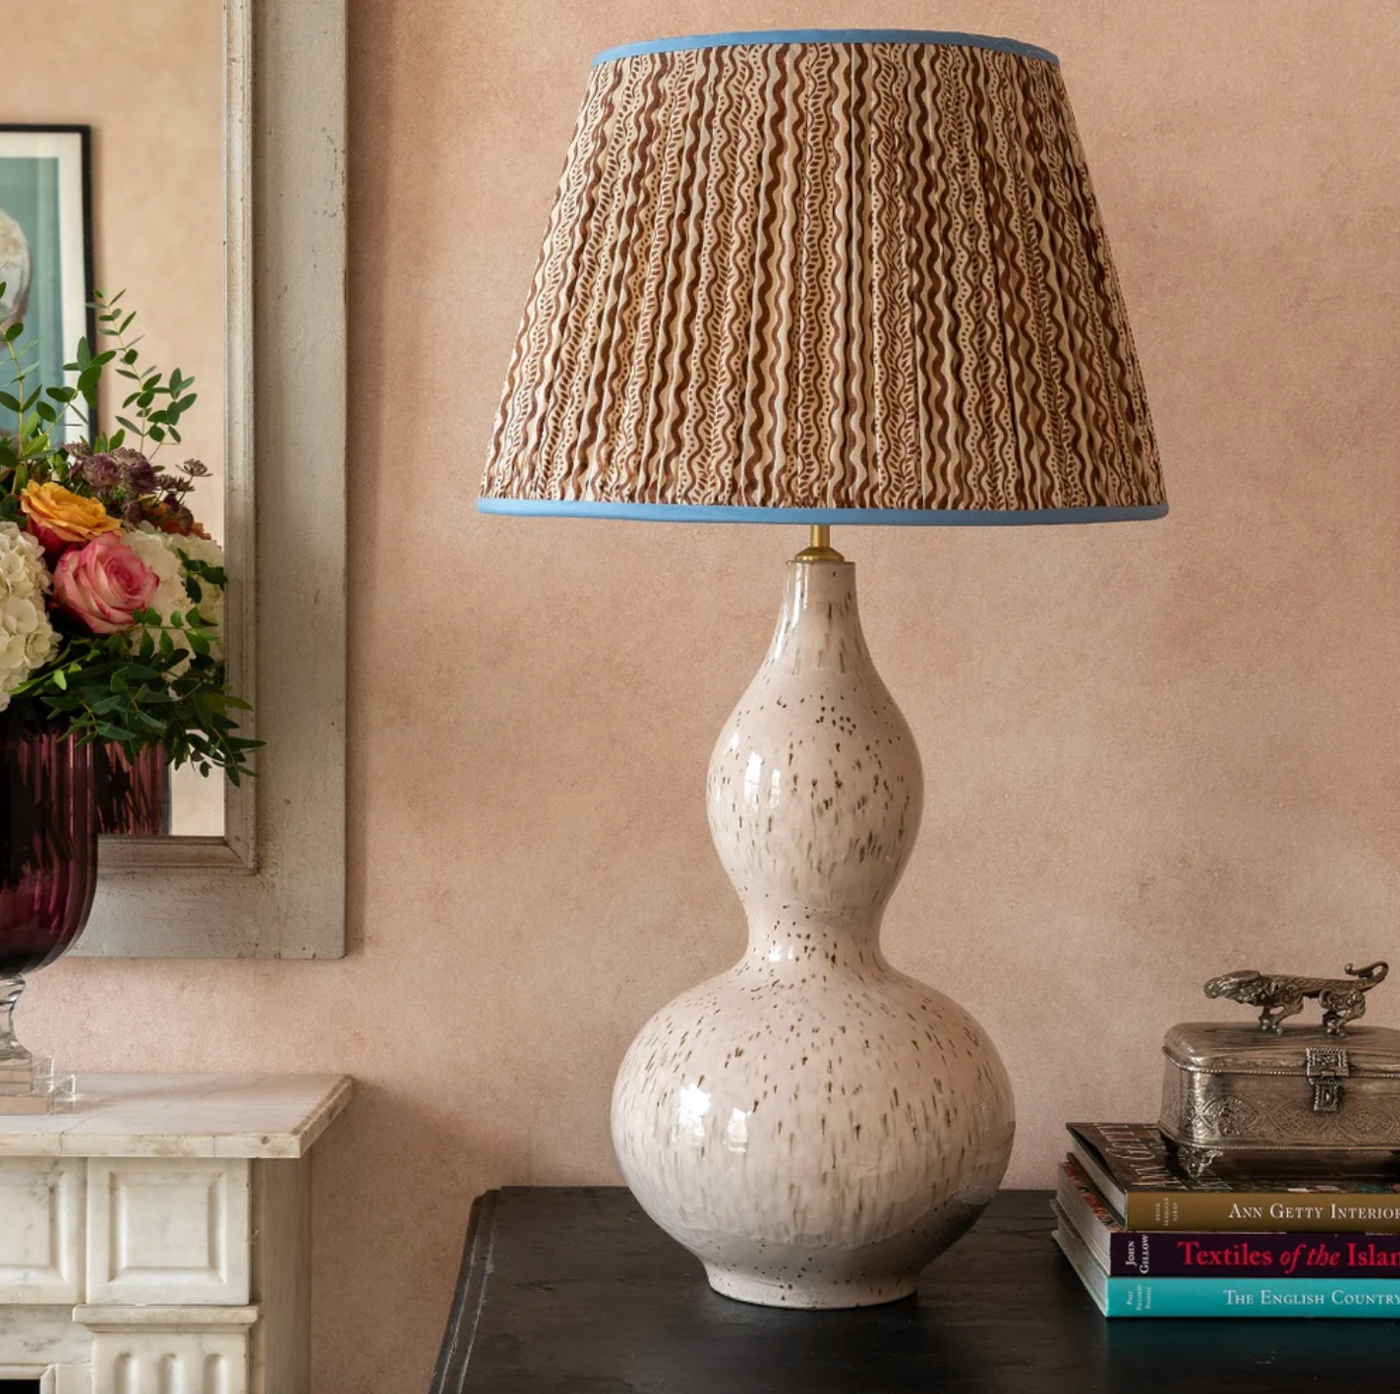 Brown Speckled Double Gourd Ceramic Table Lamp by Penny Morrison | Newport Lamp And Shade | Located in Newport, RI